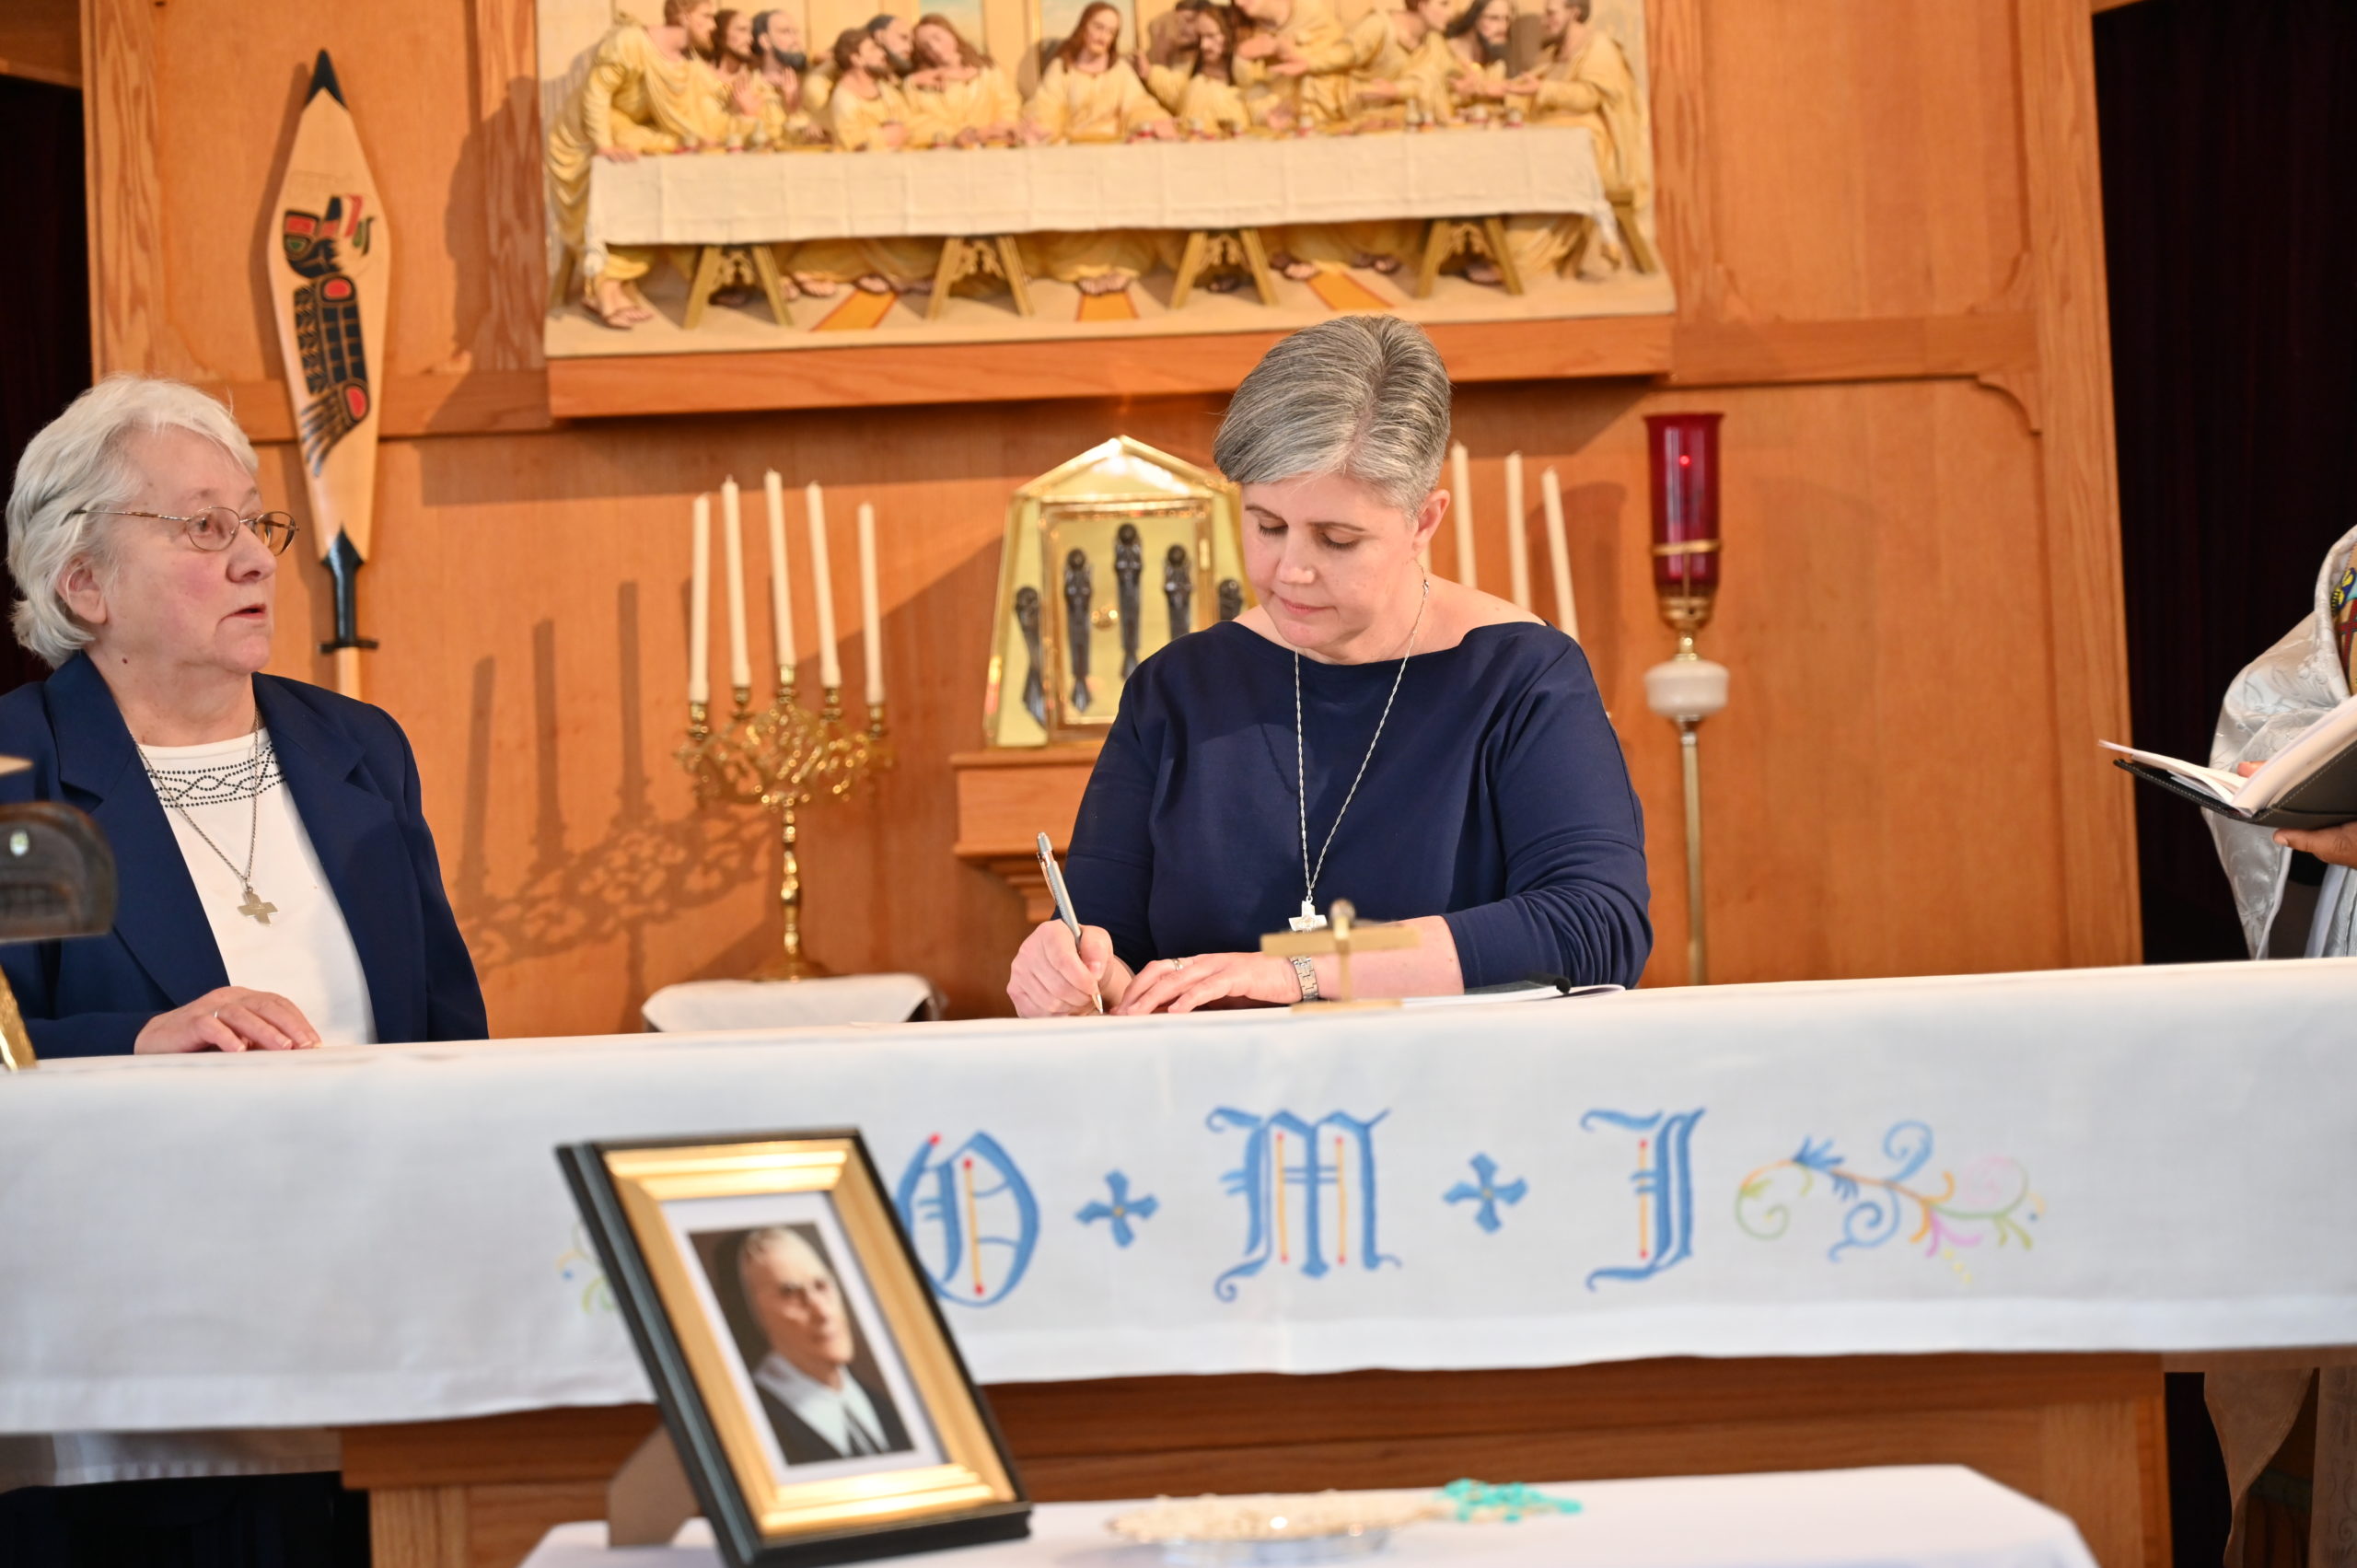 The First Religious Profession of Sister Heather Charest in North Vancouver, Canada, on March 25th.